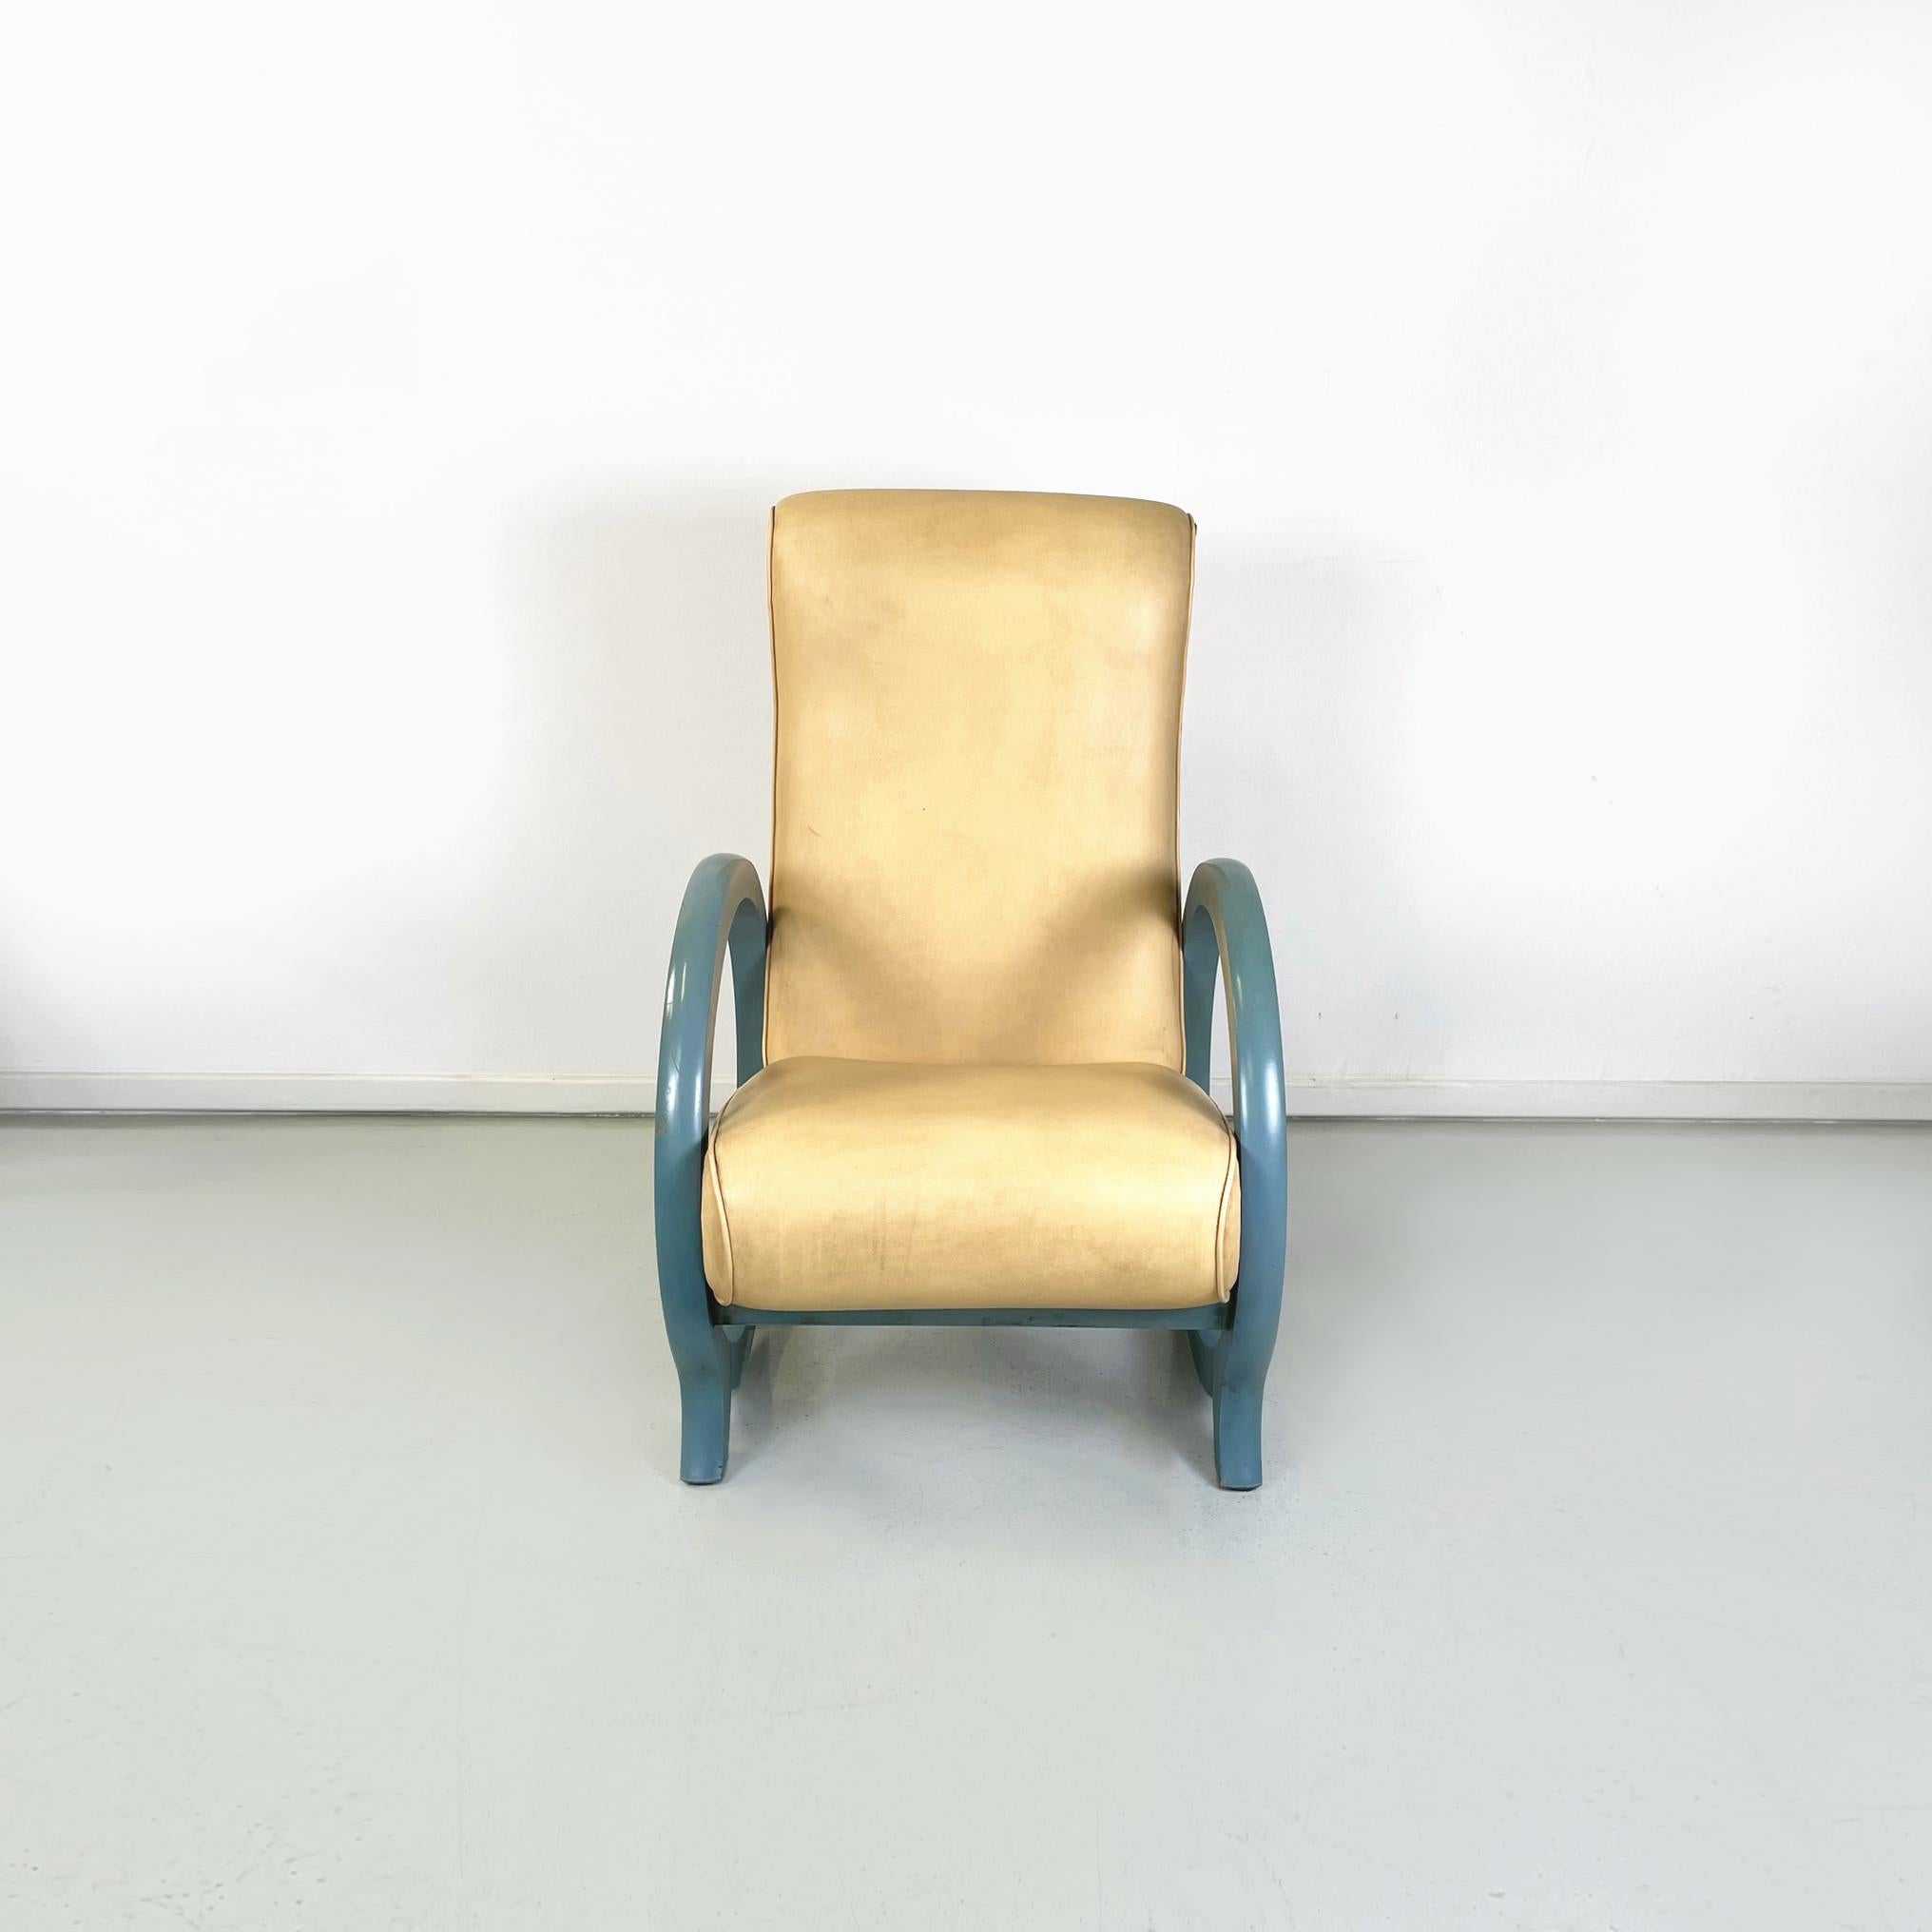 Italian modern Armchair in beige leather and light blue wood, 1980s
Armchair with rounded seat and back, padded and upholstered in beige leather. The cerulean light blue painted wooden armrests are in the shape of a circle, at the base of which